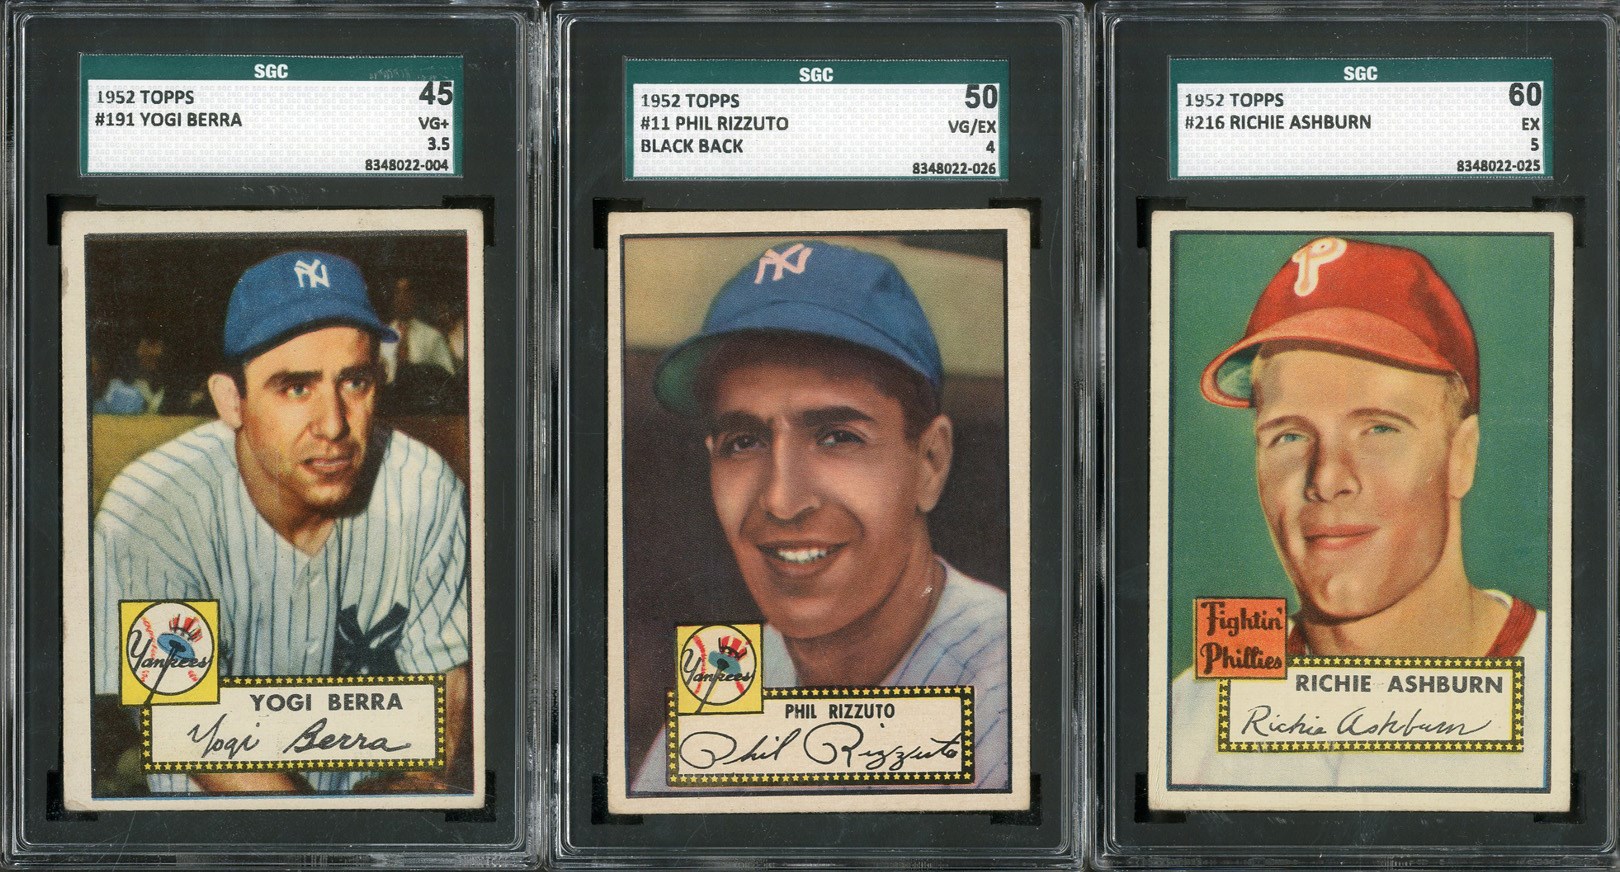 Baseball and Trading Cards - 1952 Topps Collection of 200 Cards with 16 High Numbers with SGC Graded